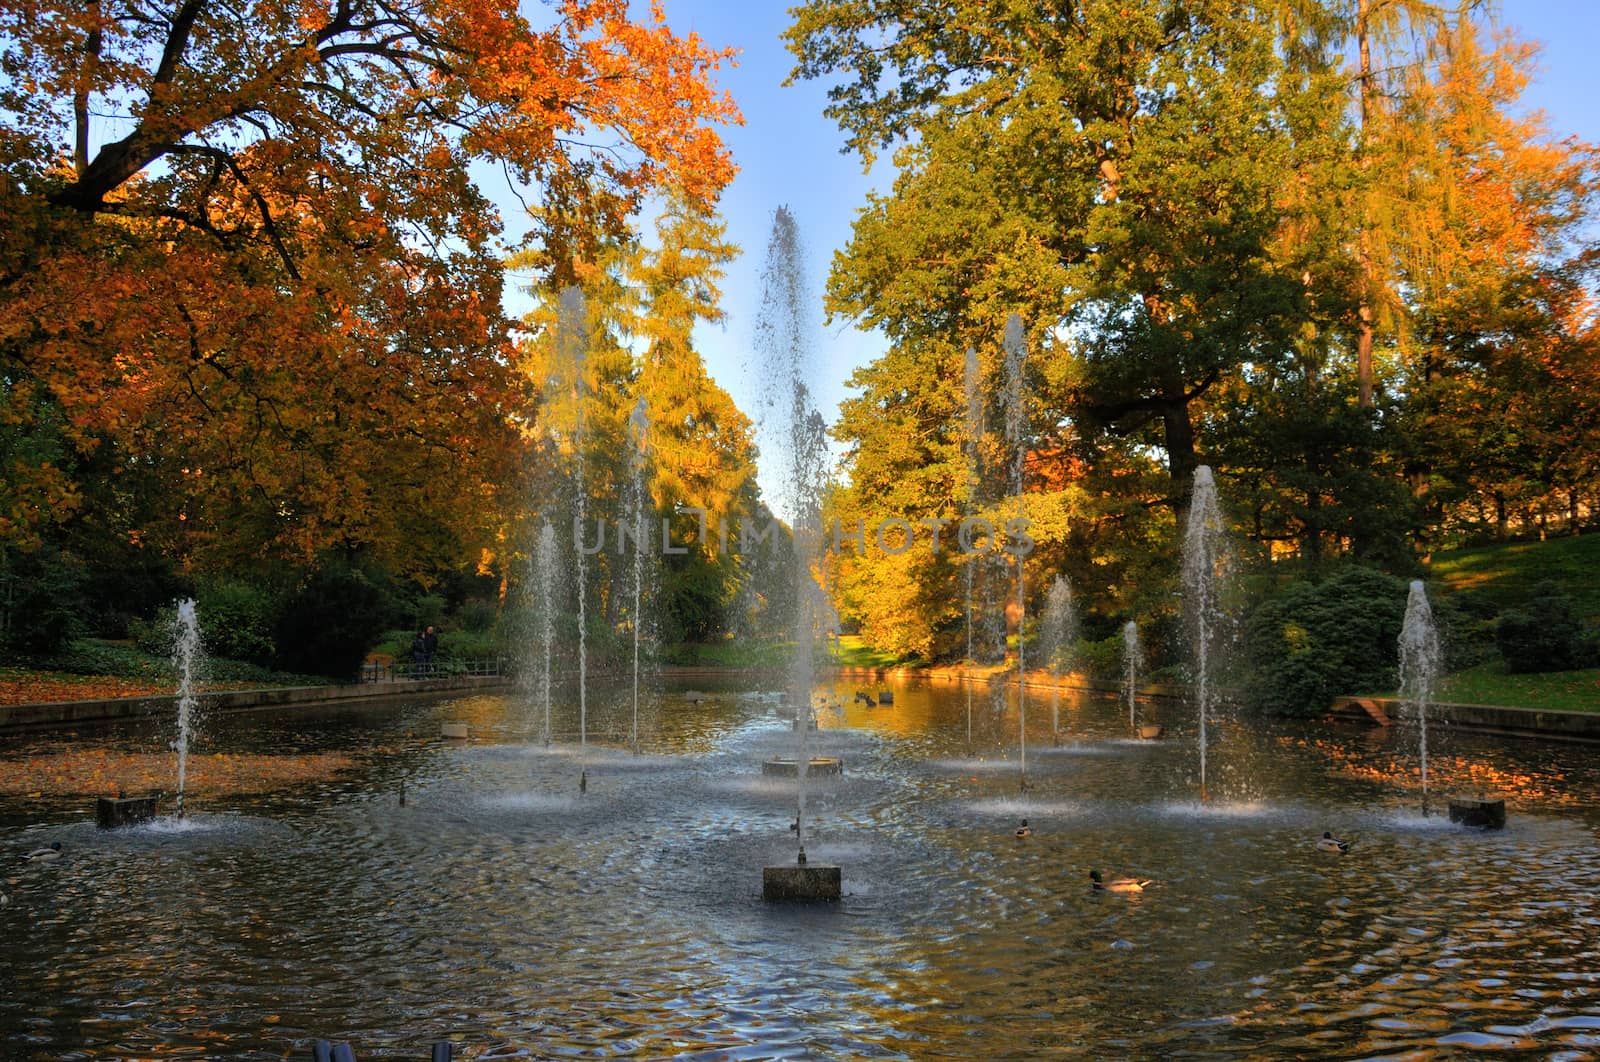 Autumn fontains at the Stadtschloss park in Fulda, Hessen, Germany